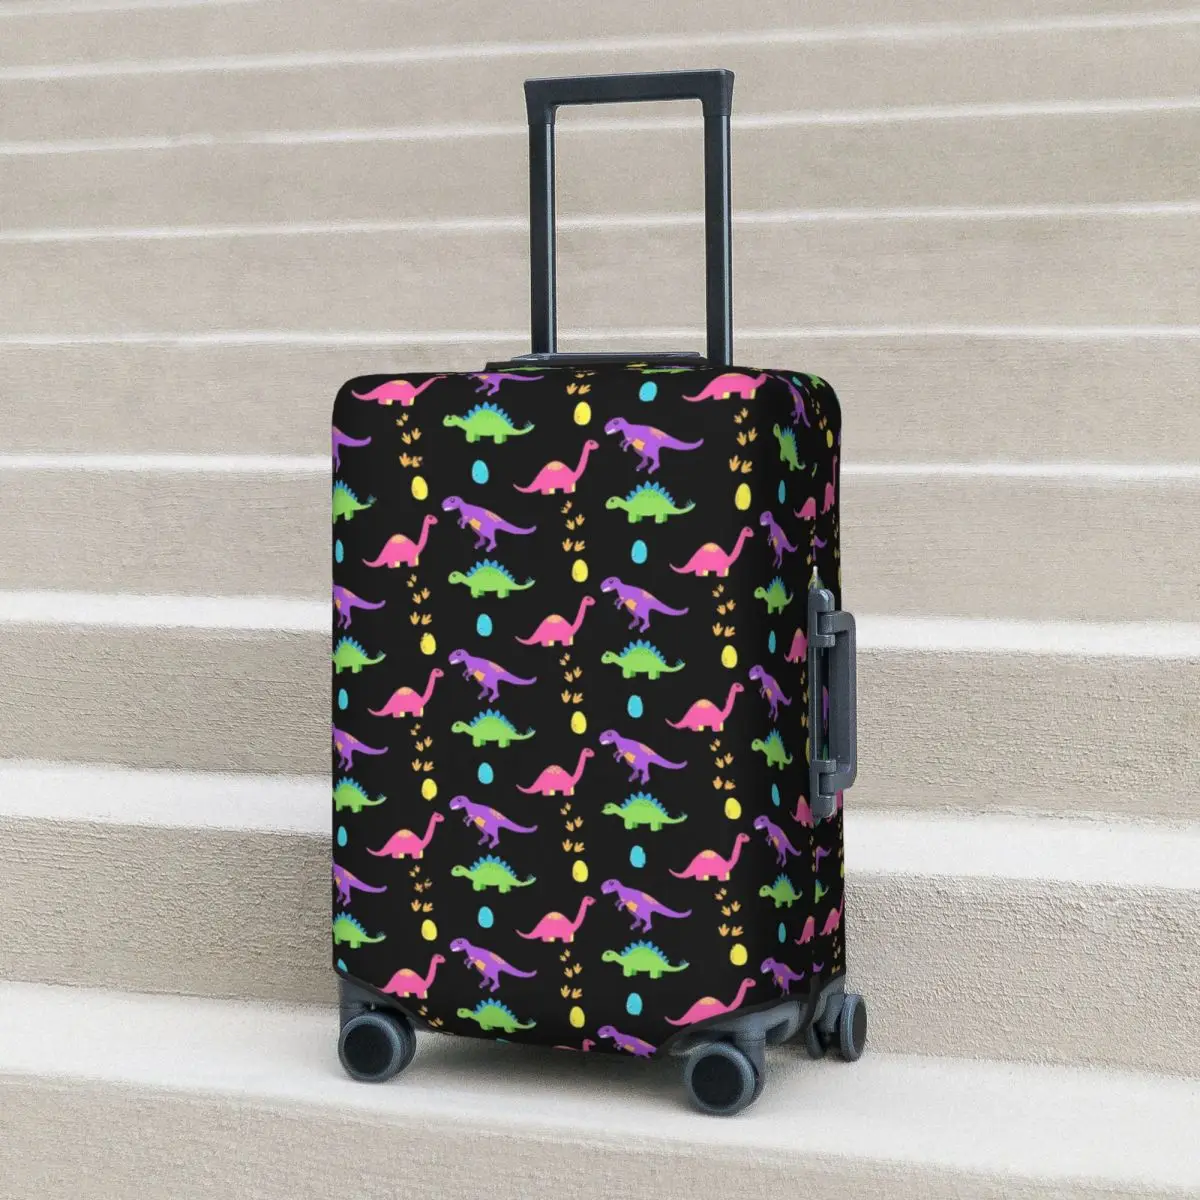 

Dinosaur Fields Suitcase Cover Colorful Animal Print Travel Flight Strectch Luggage Case Protection